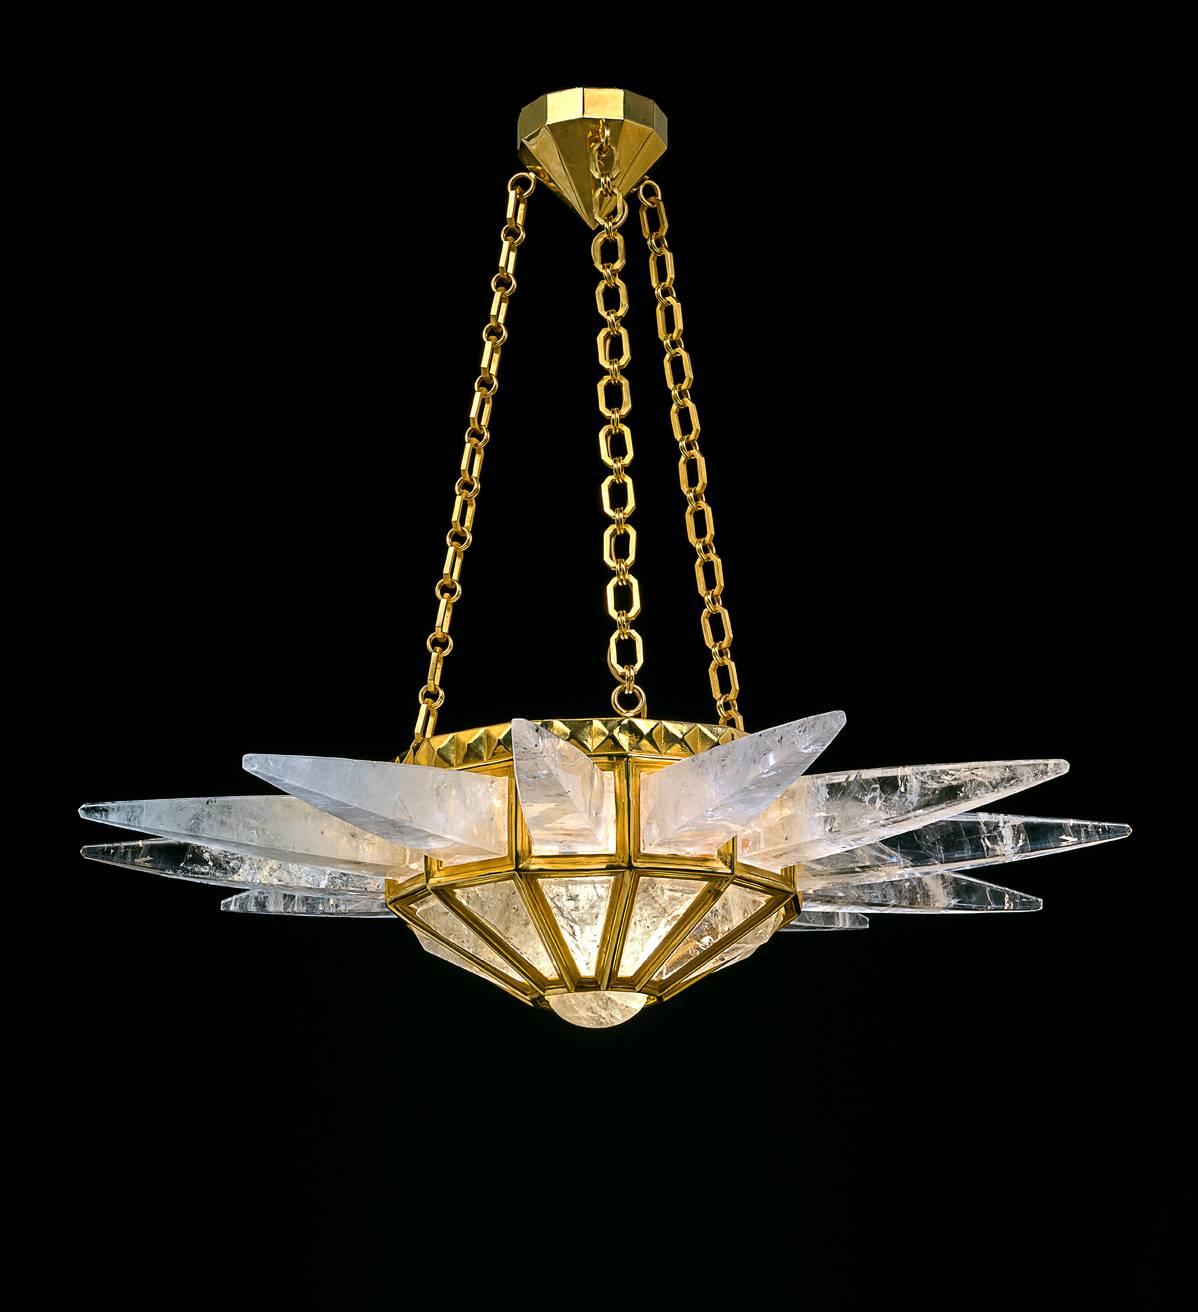 Rock crystal  quartz sunshine light, gold edition. Original model design by Alexandre Vossion and made since 2014. The fixture, chains and canopy of this rock crystal chandelier are handmade in bronze in Paris. Workers who made this model worked